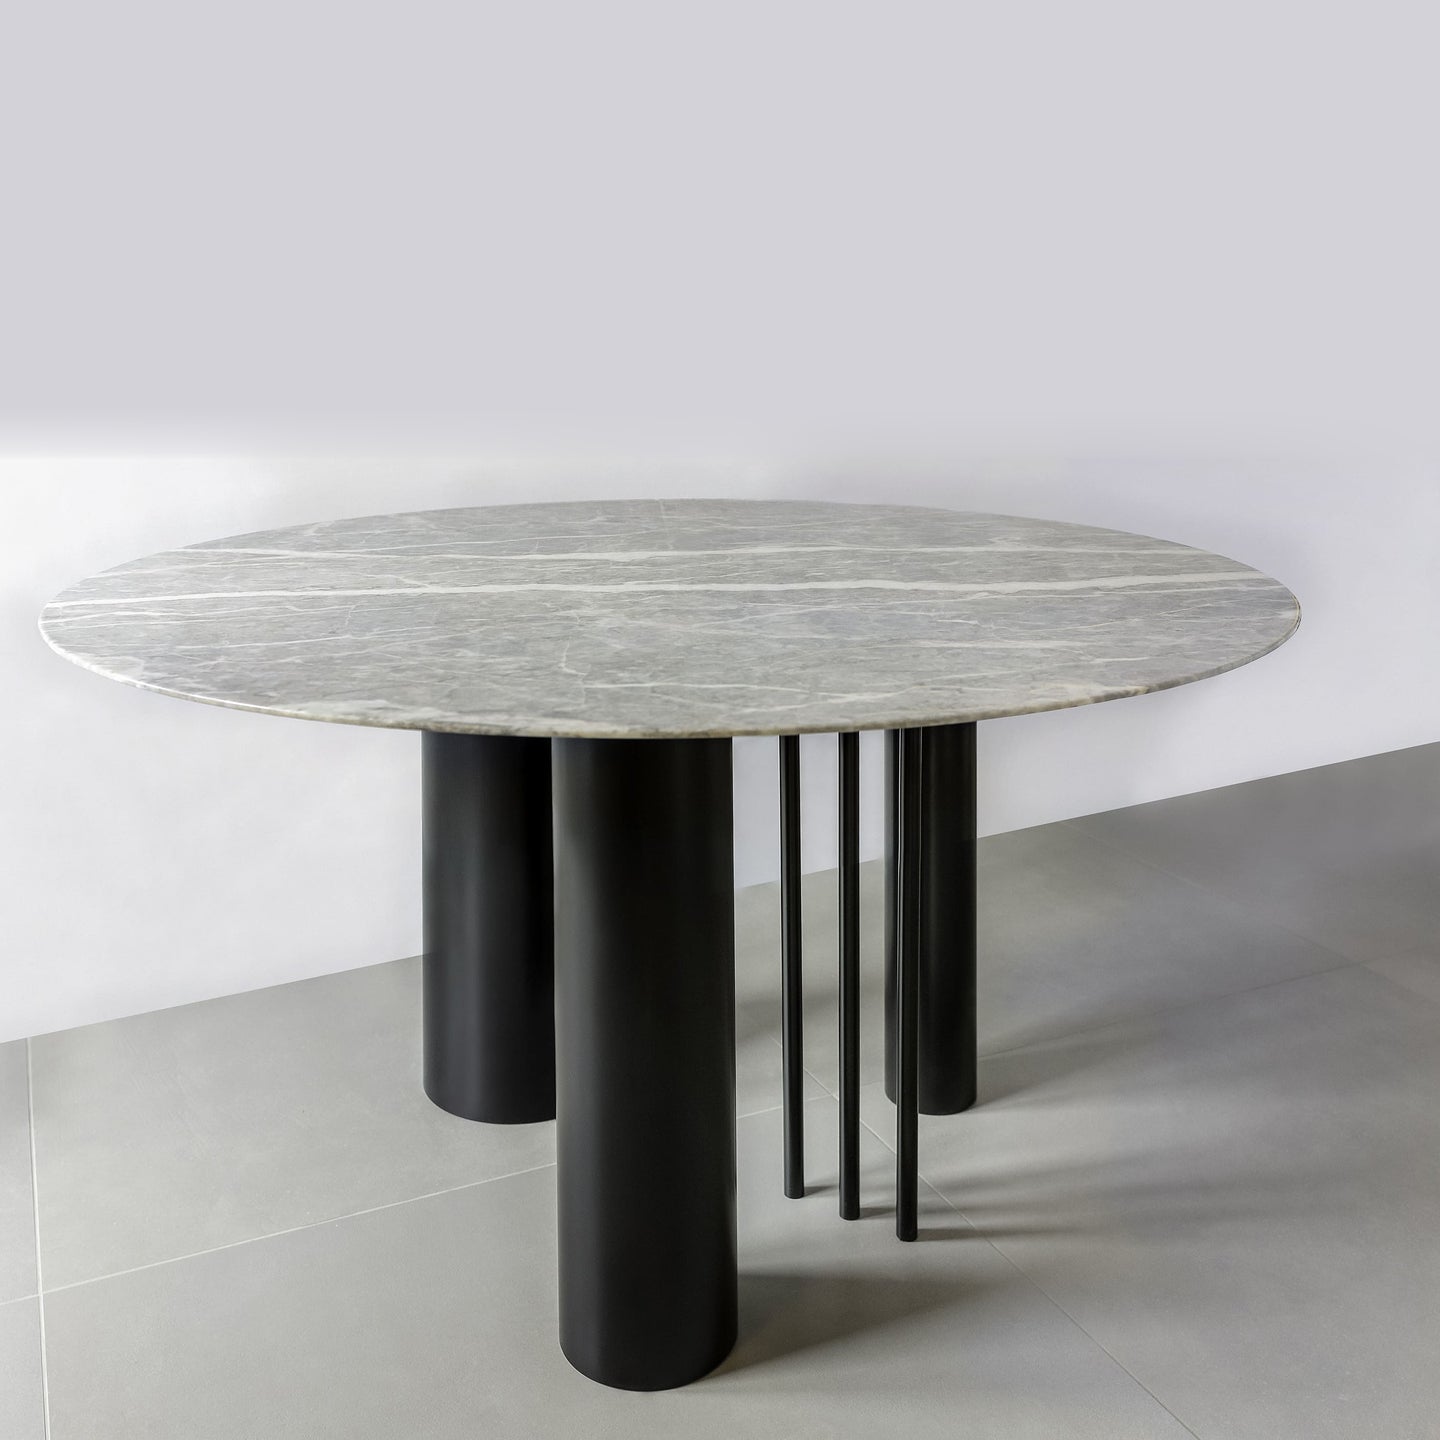 Terra Dining Table